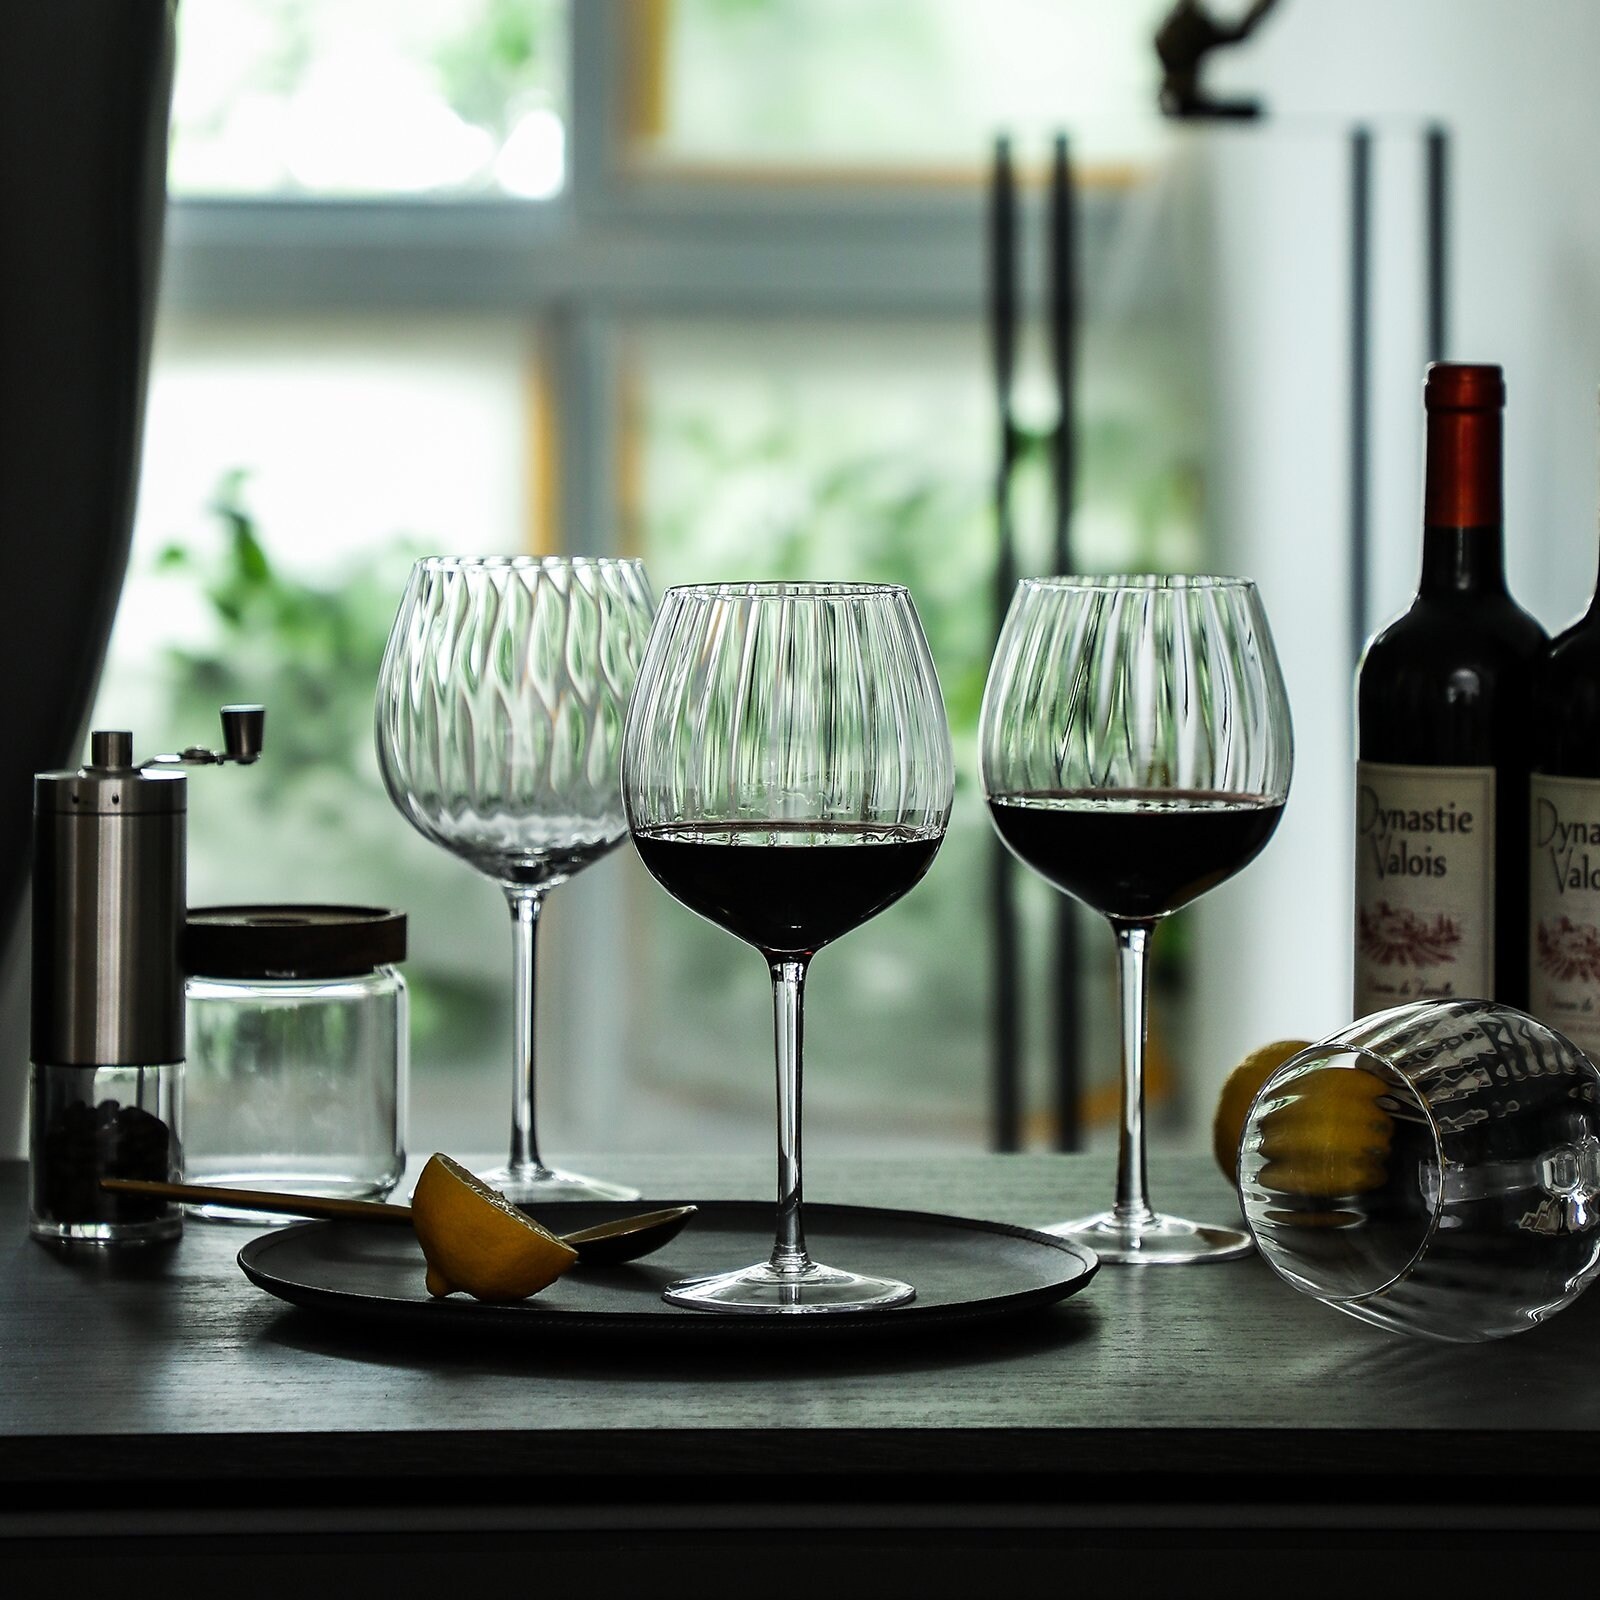 https://ak1.ostkcdn.com/images/products/is/images/direct/d276ed2a71c36a43a5c285cdf0d8a02b5c3c1bc2/Ribbed-Optic-Wine-Glasses-set-of-4.jpg